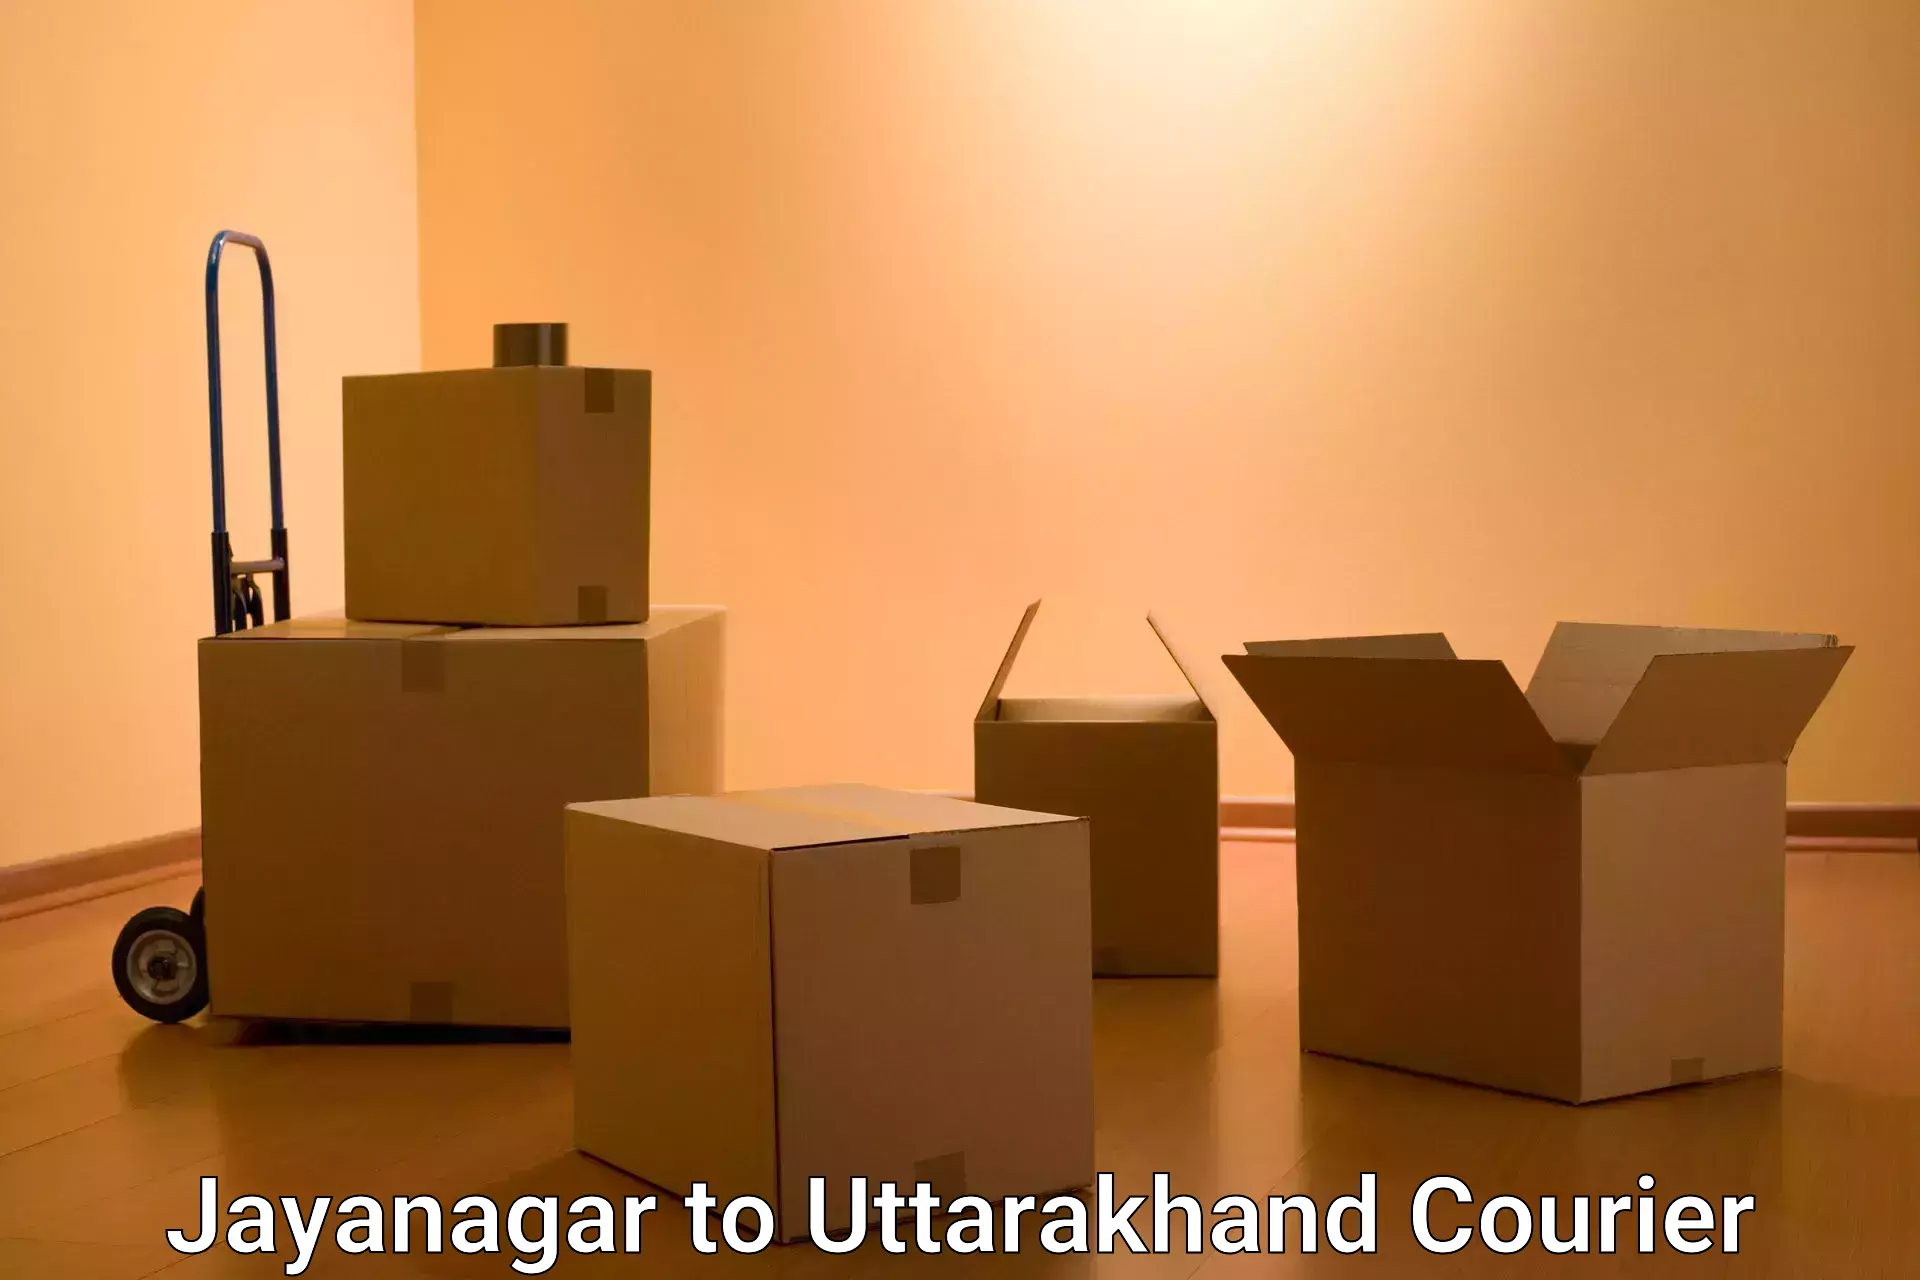 Package delivery network Jayanagar to Almora